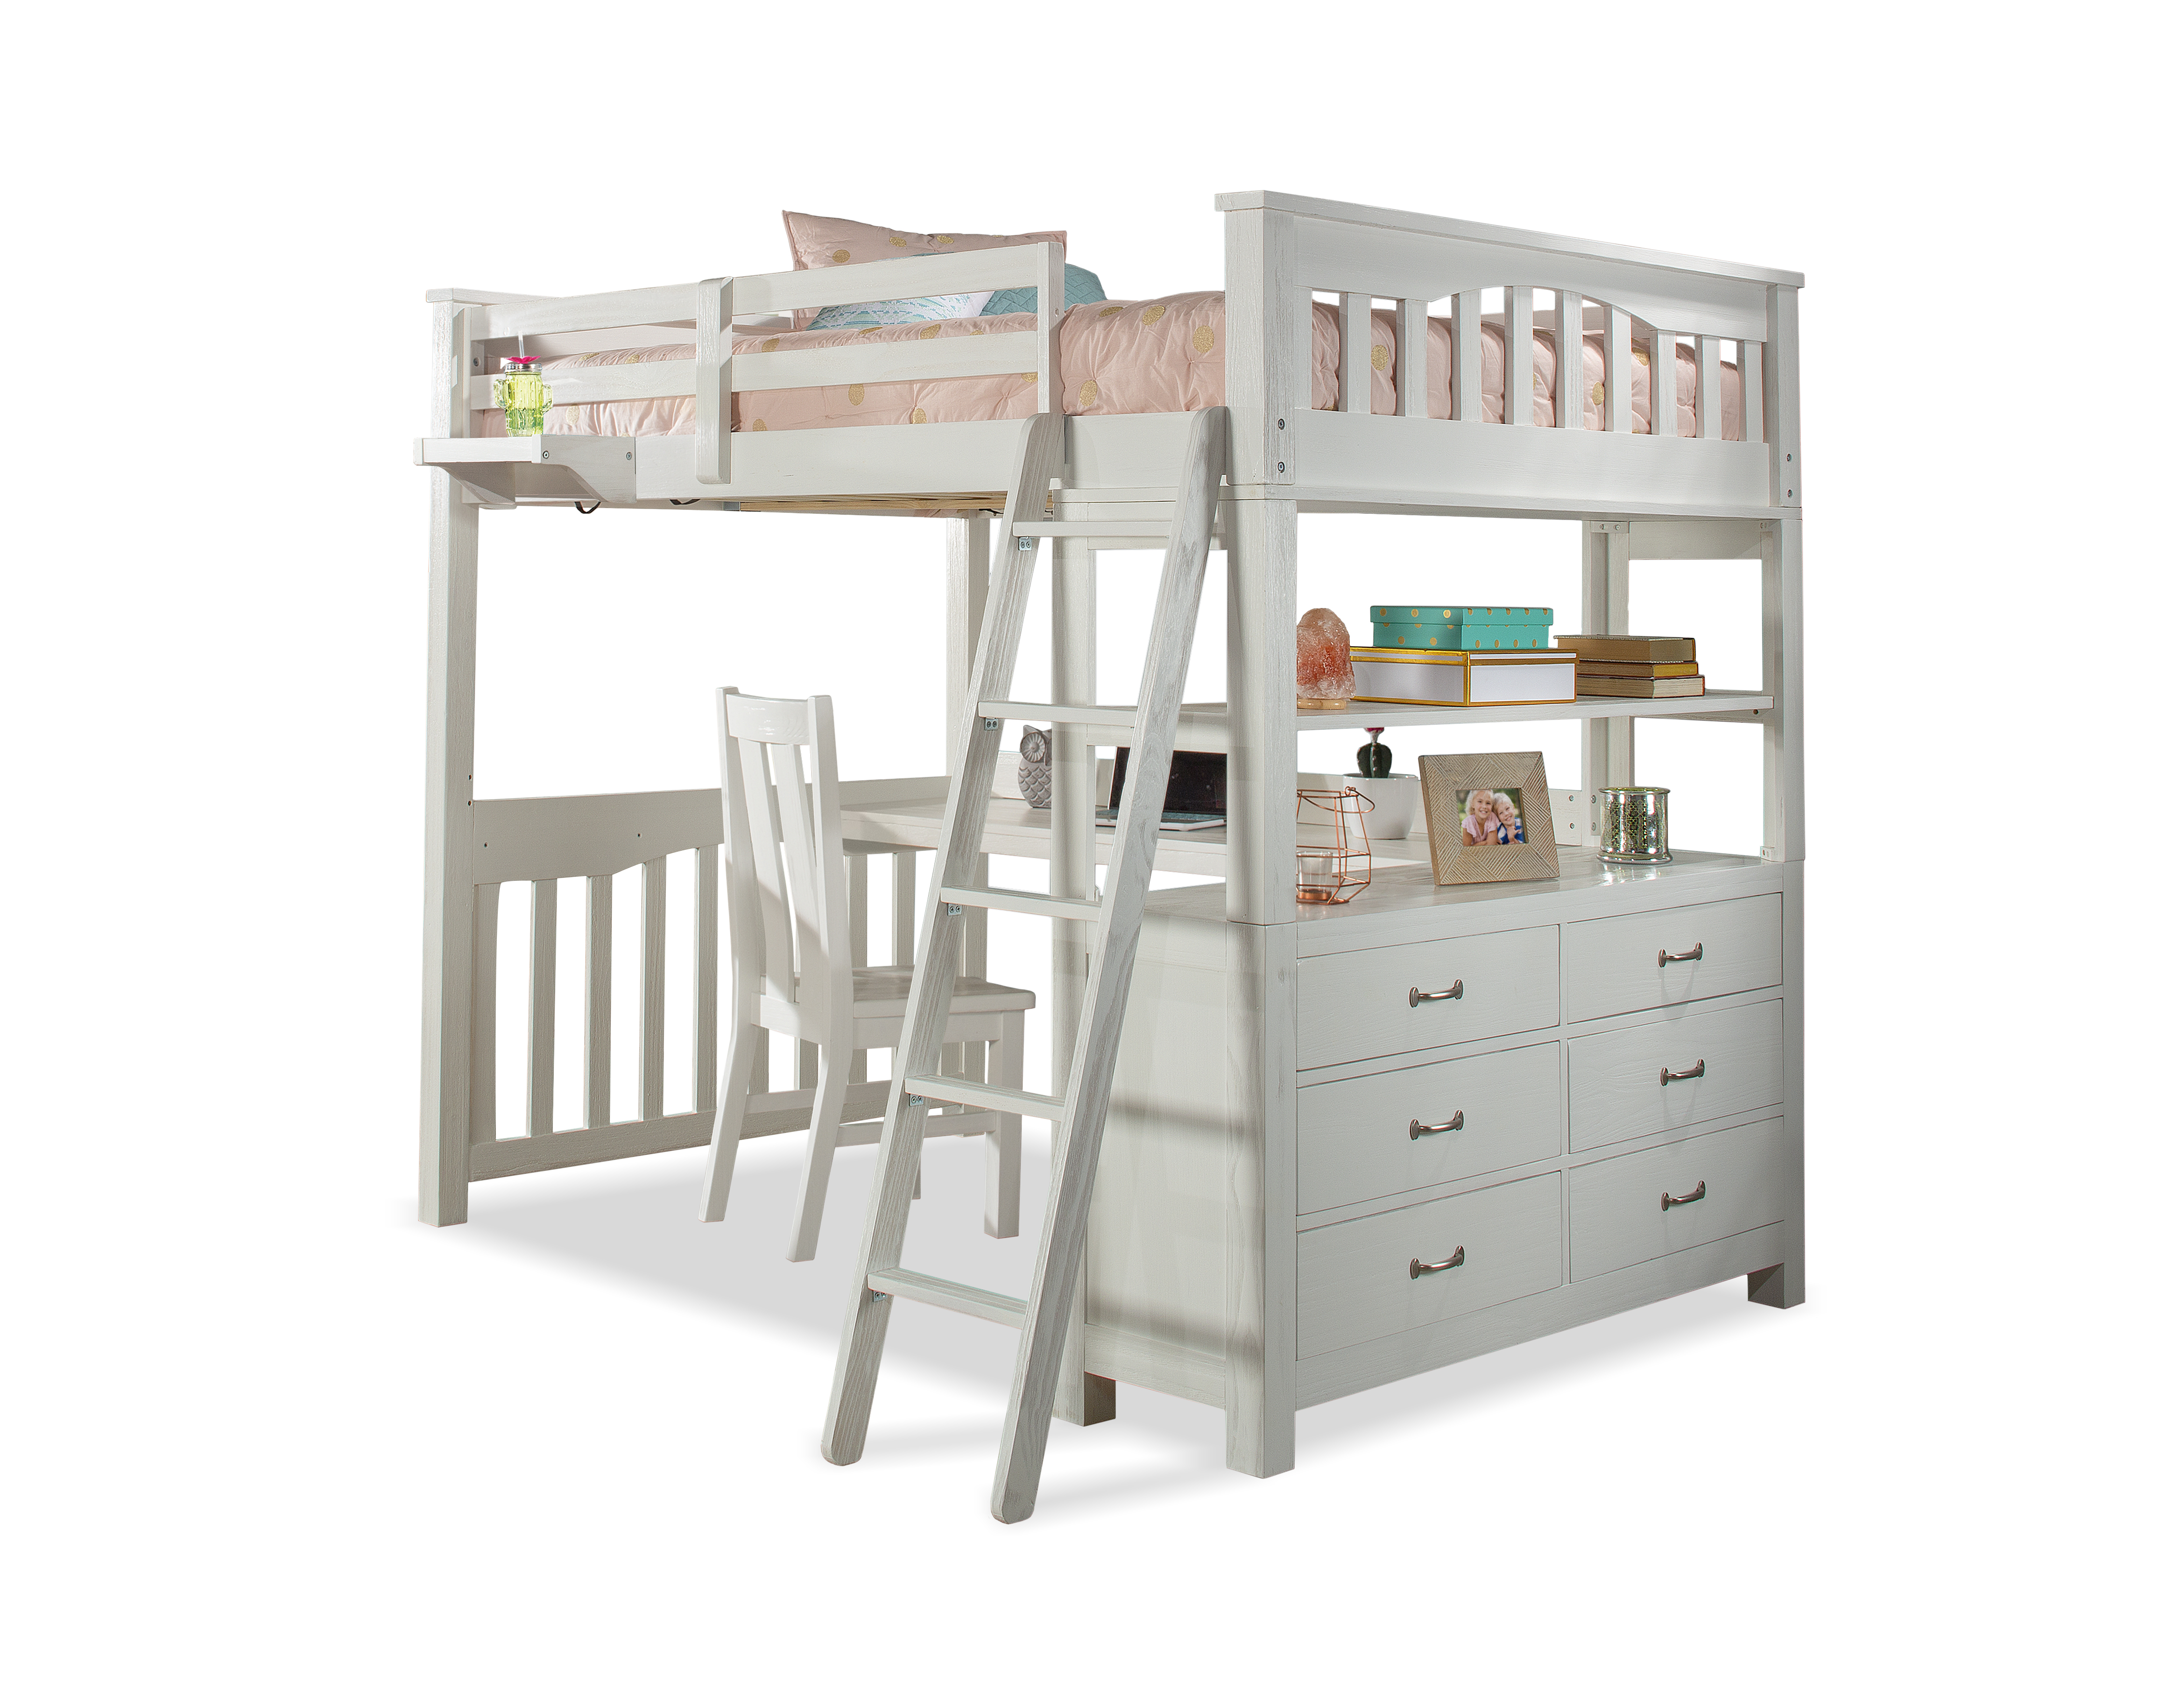 Highlands Wood Twin Loft Bed with Desk, Chair, and Hanging Nightstand